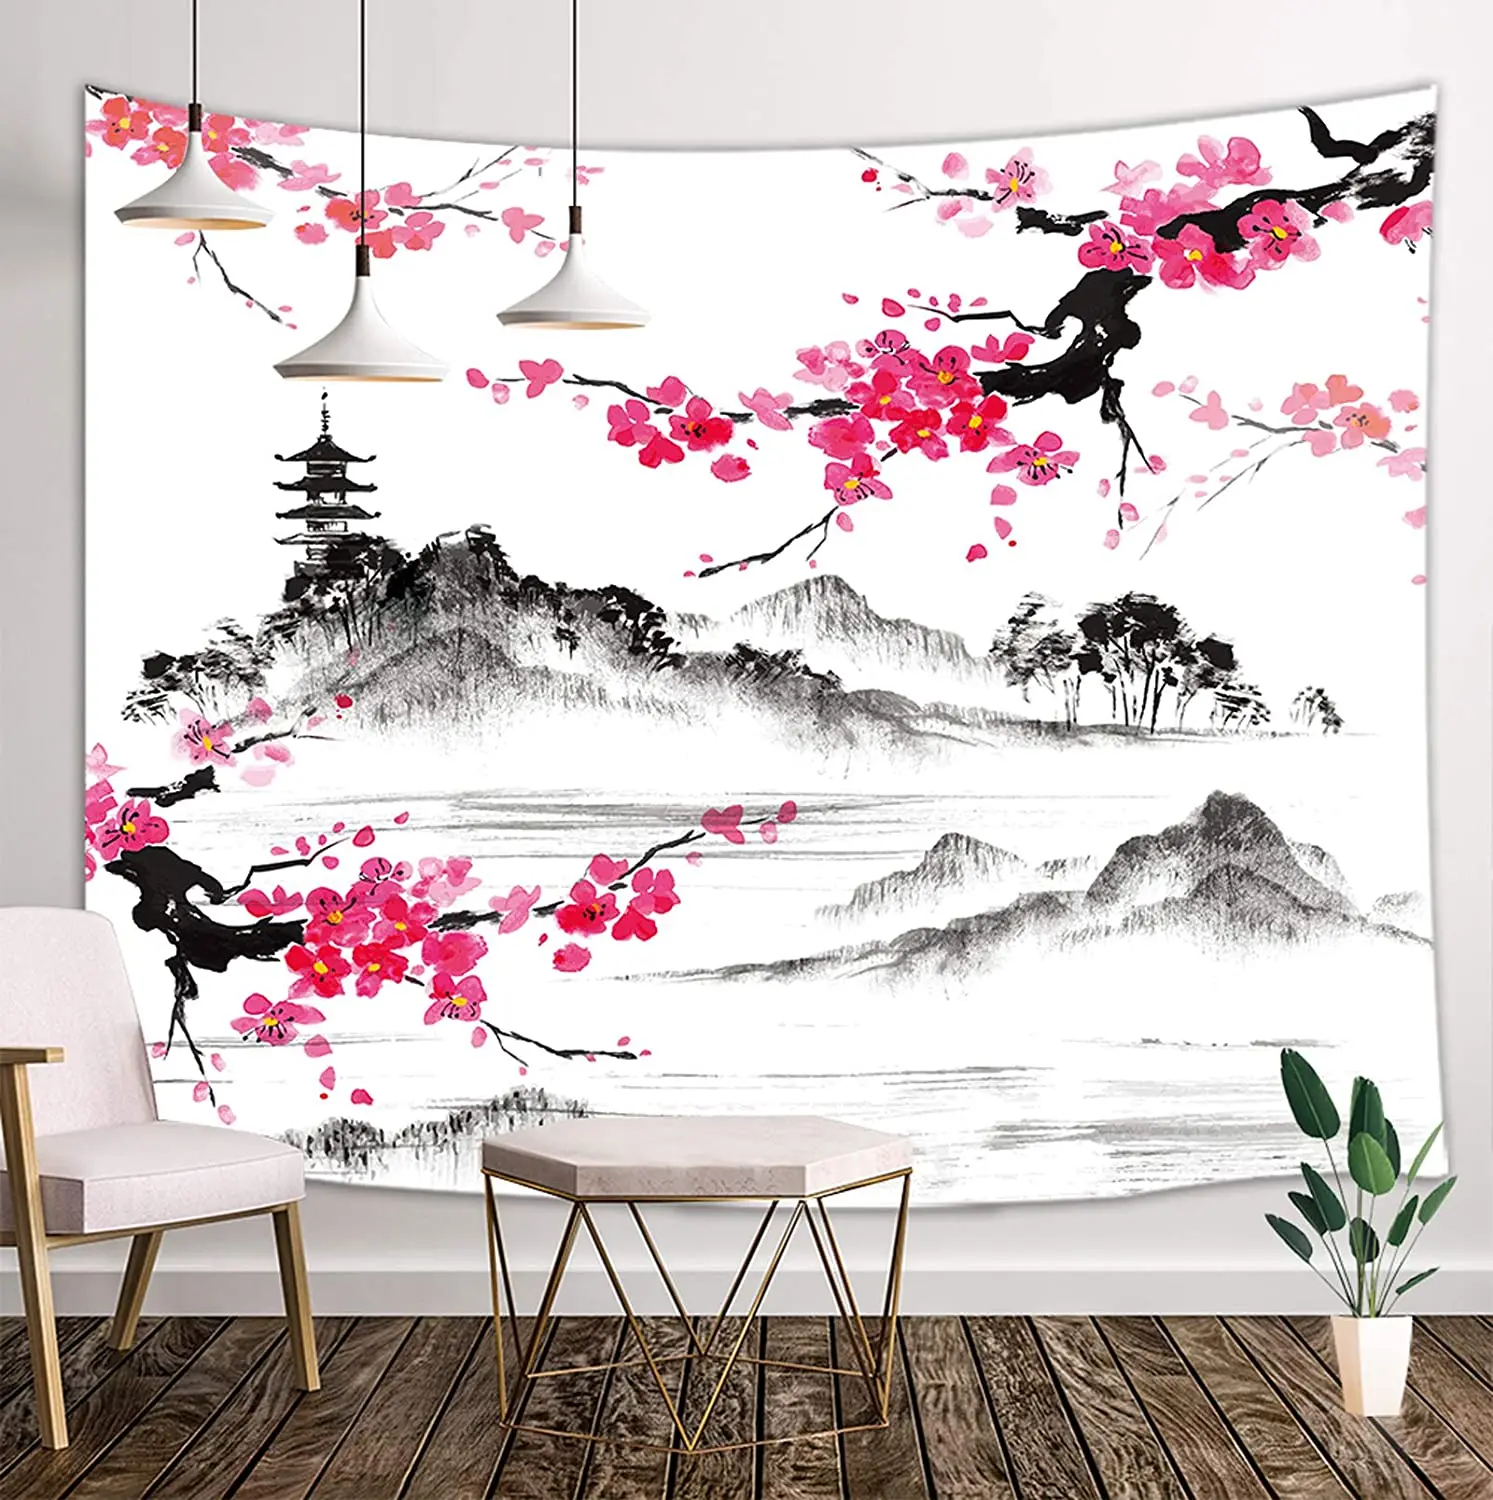 

Japanese Asian Anime Mount Fuji with Cherry Blossoms Sakura Flower Tapestry Wall Hanging for Living Room Bedroom